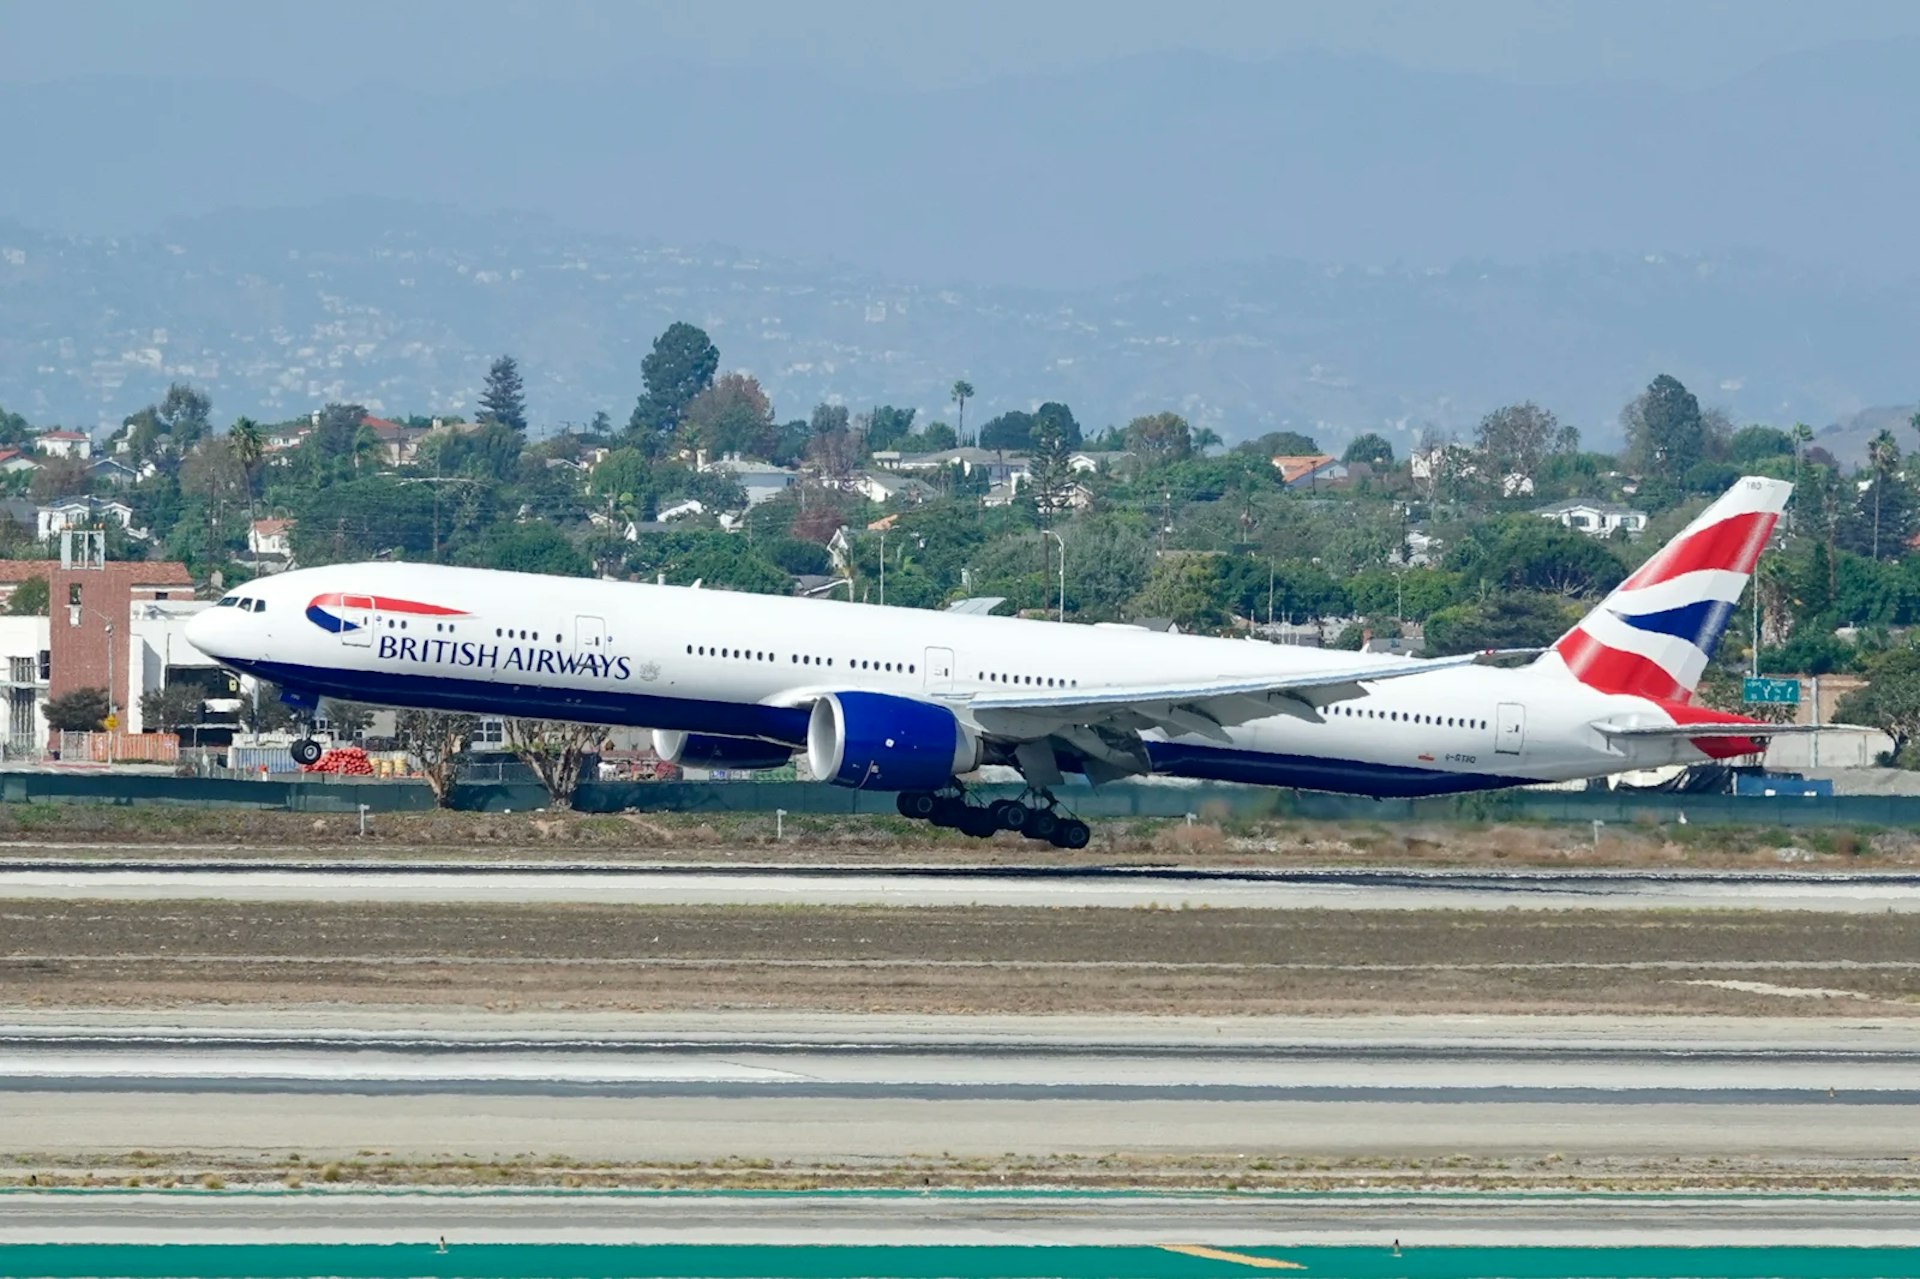 A British Airways flight takes off from LAX